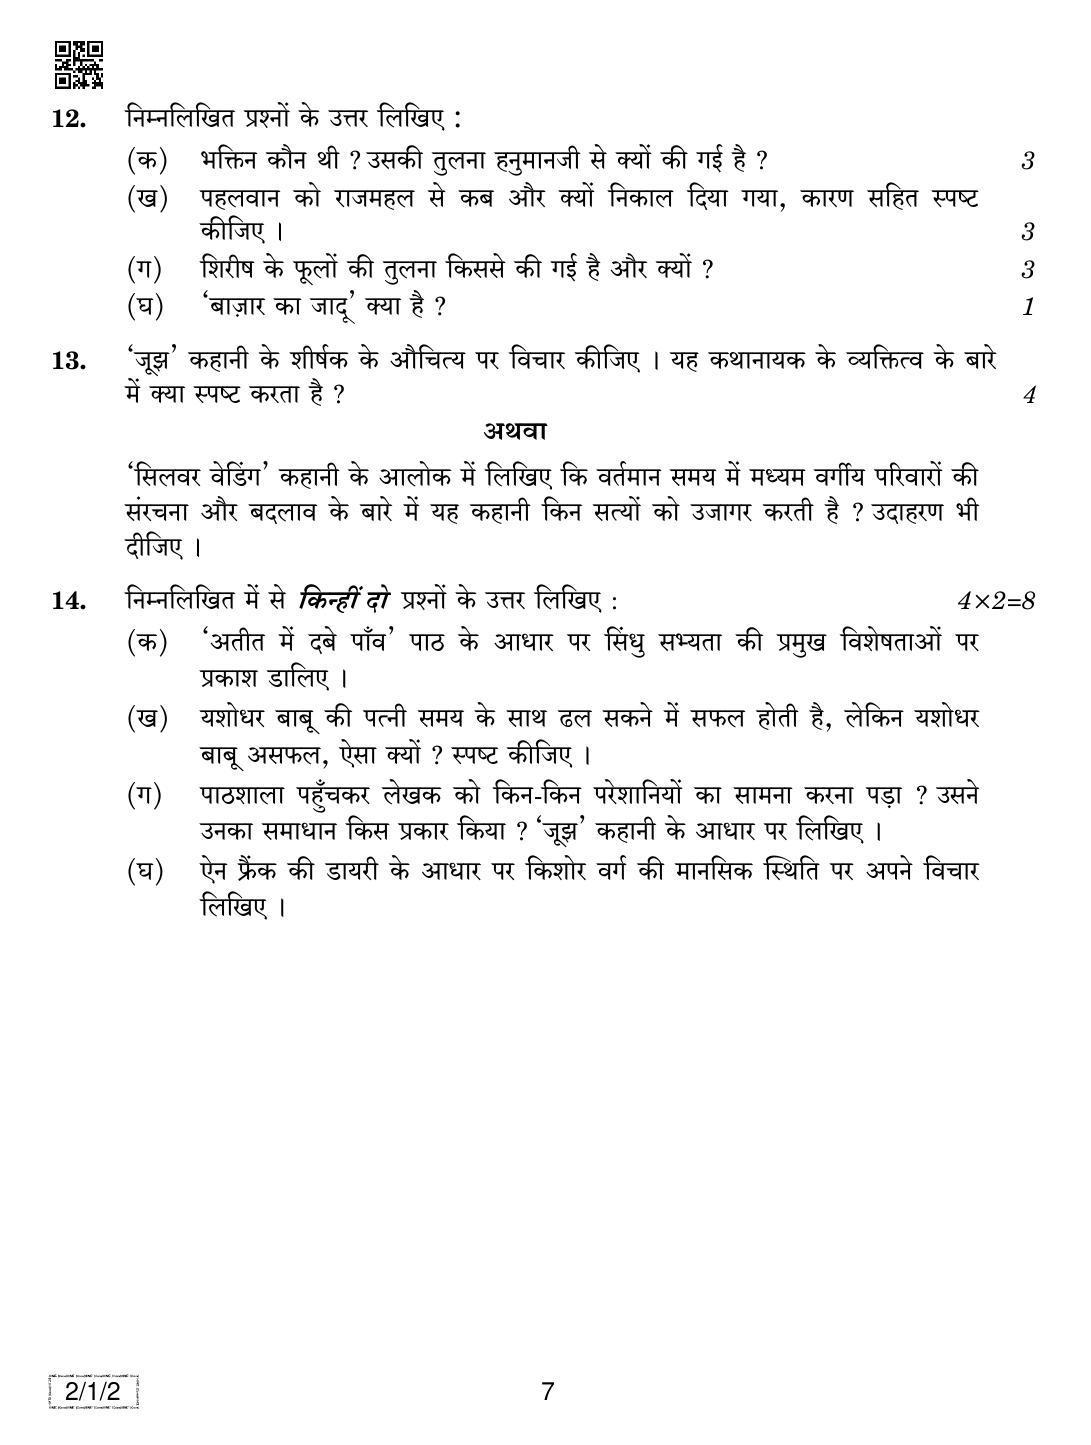 CBSE Class 12 2-1-2 HINDI CORE 2019 Compartment Question Paper - Page 7